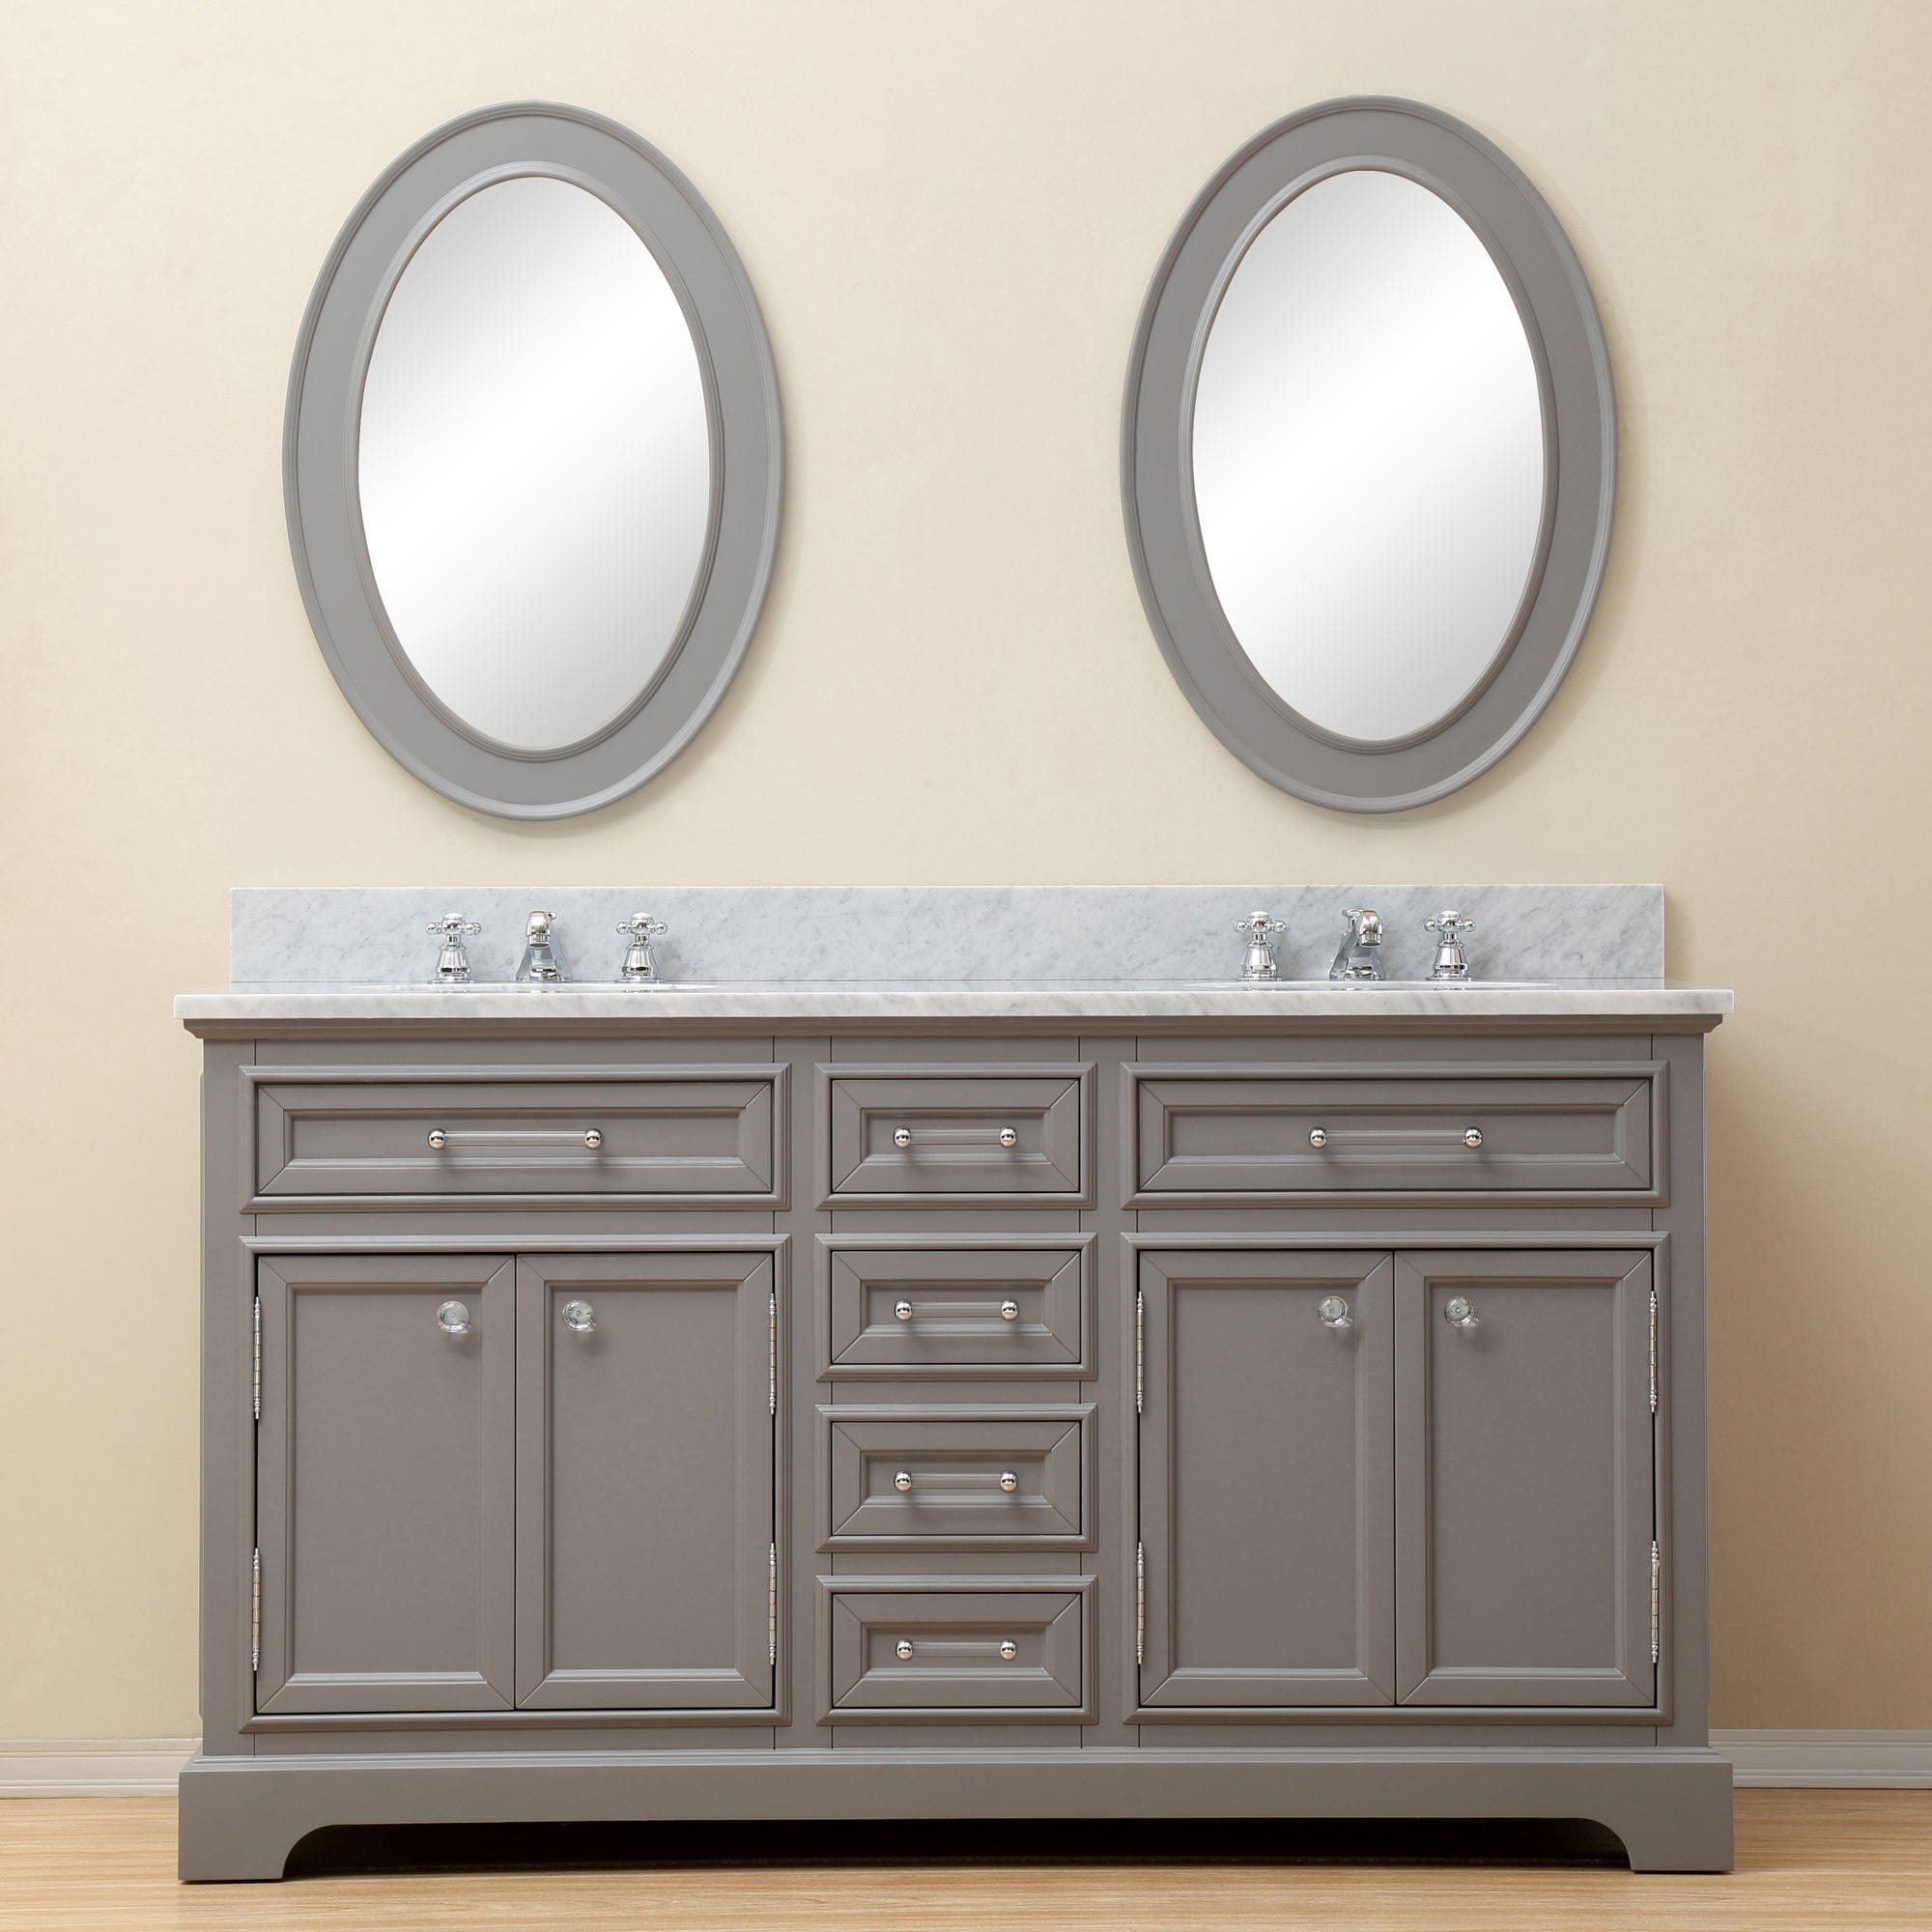 60 Inch Cashmere Grey Double Sink Bathroom Vanity With Matching Framed Mirrors And Faucets From The Derby Collection - Molaix700621683100Bathroom VanitiesDE60CW01CG-O21BX0901